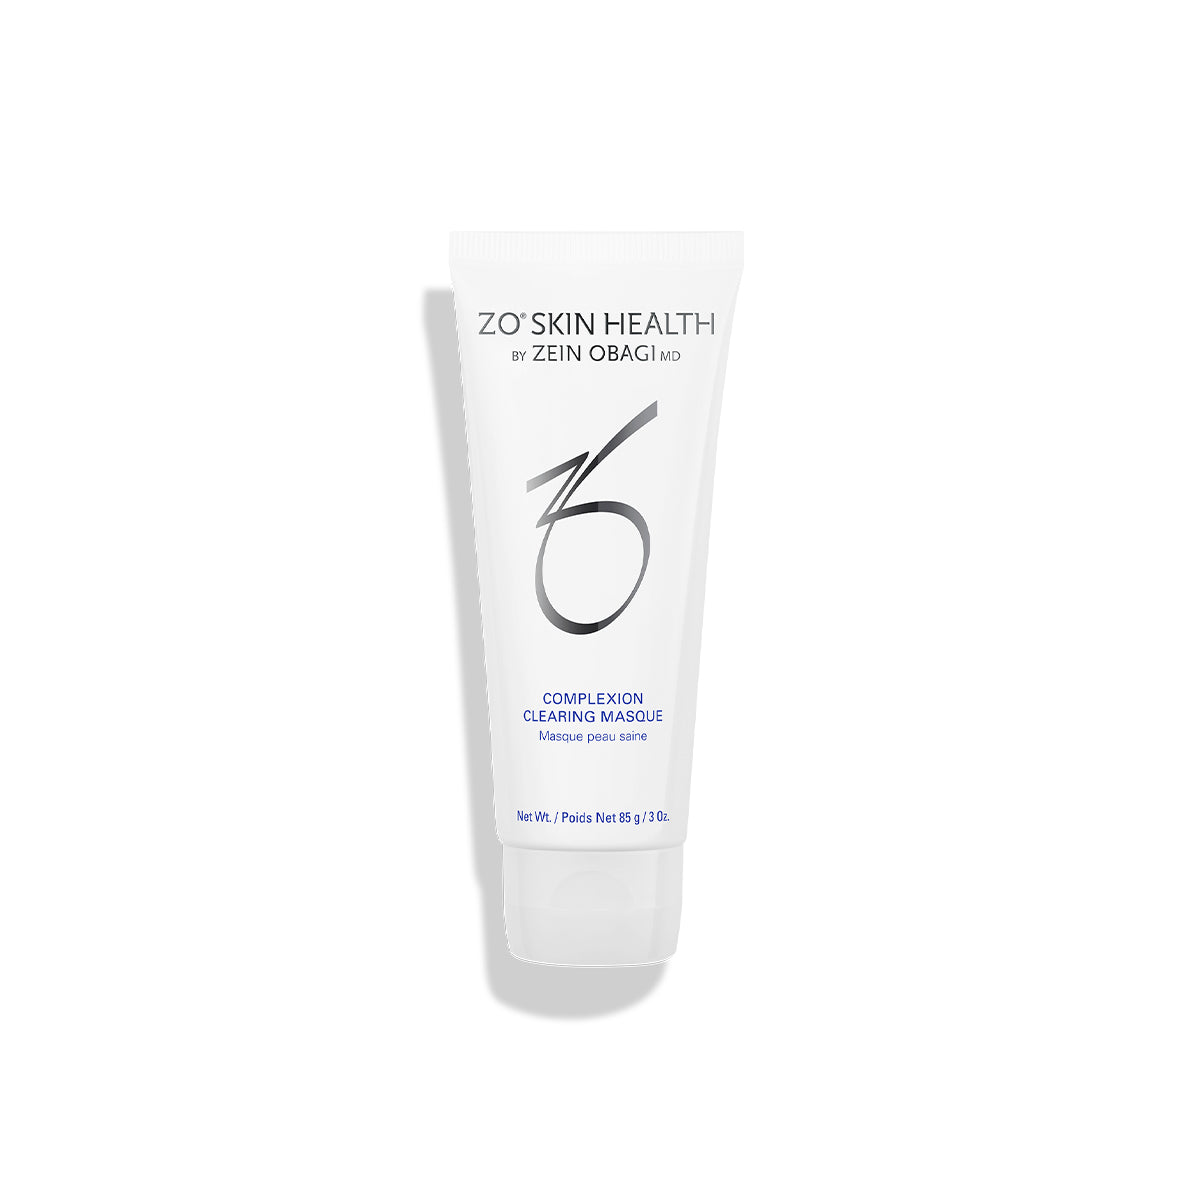 Complexion Clearing Masque (Sulfur 10%)